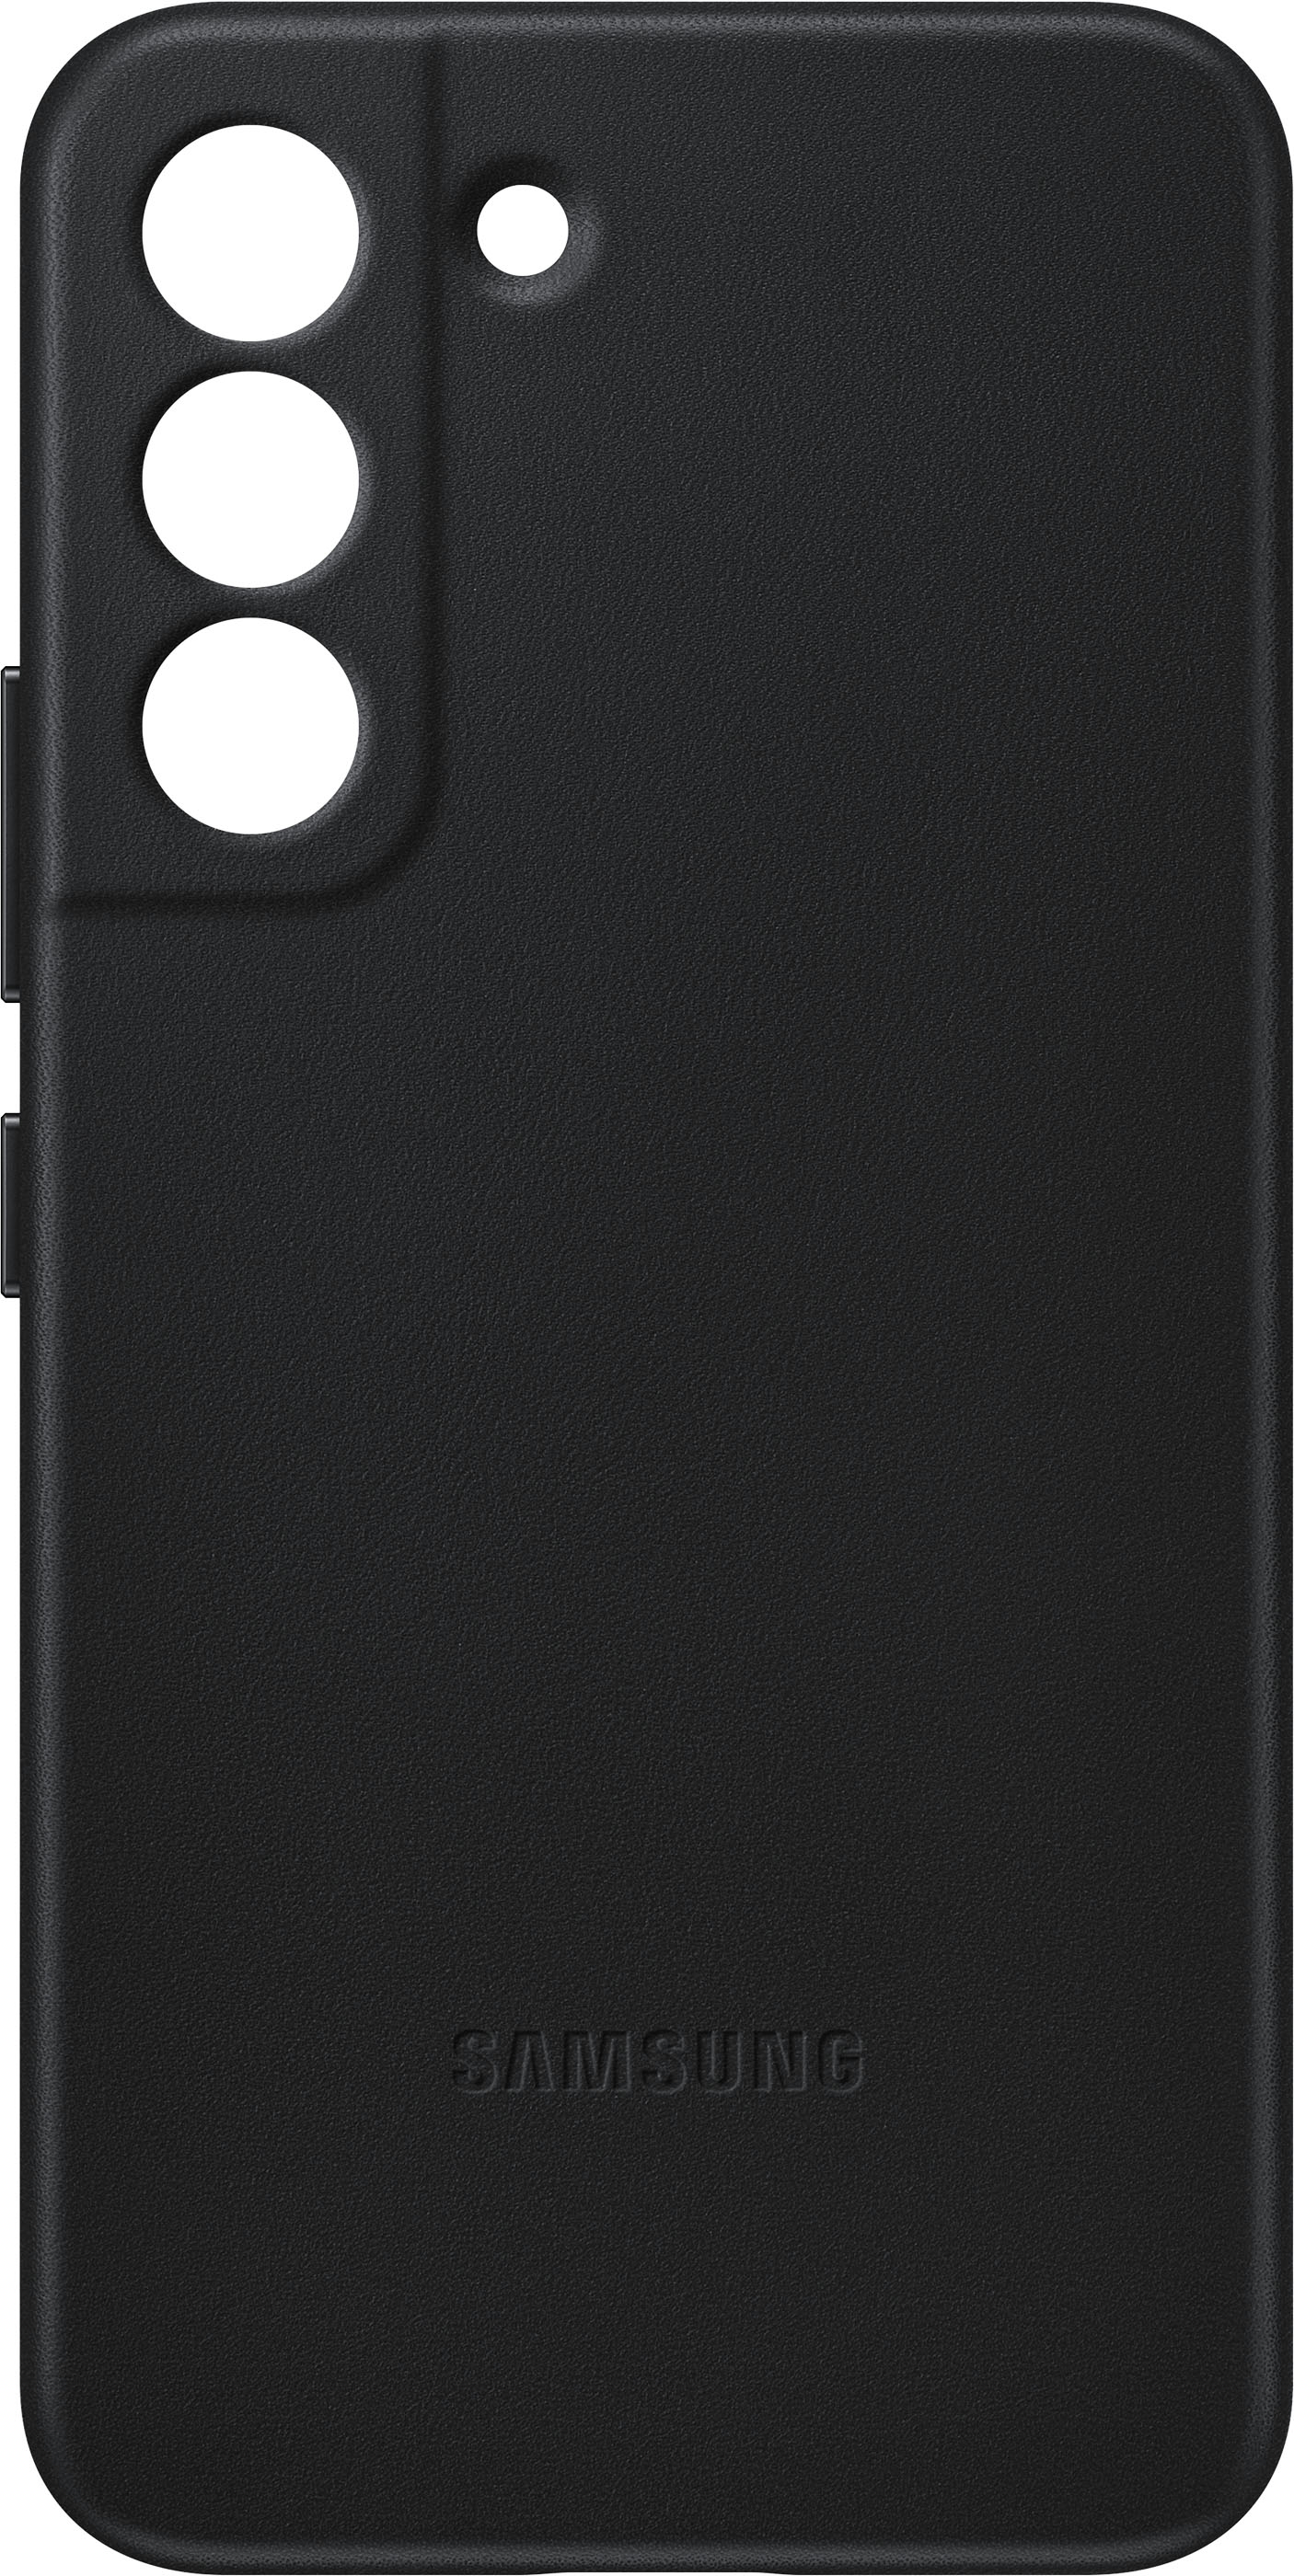 Galaxy S22 DOUBLE INJECTION LEATHER CASES – Banana Cellular Solutions